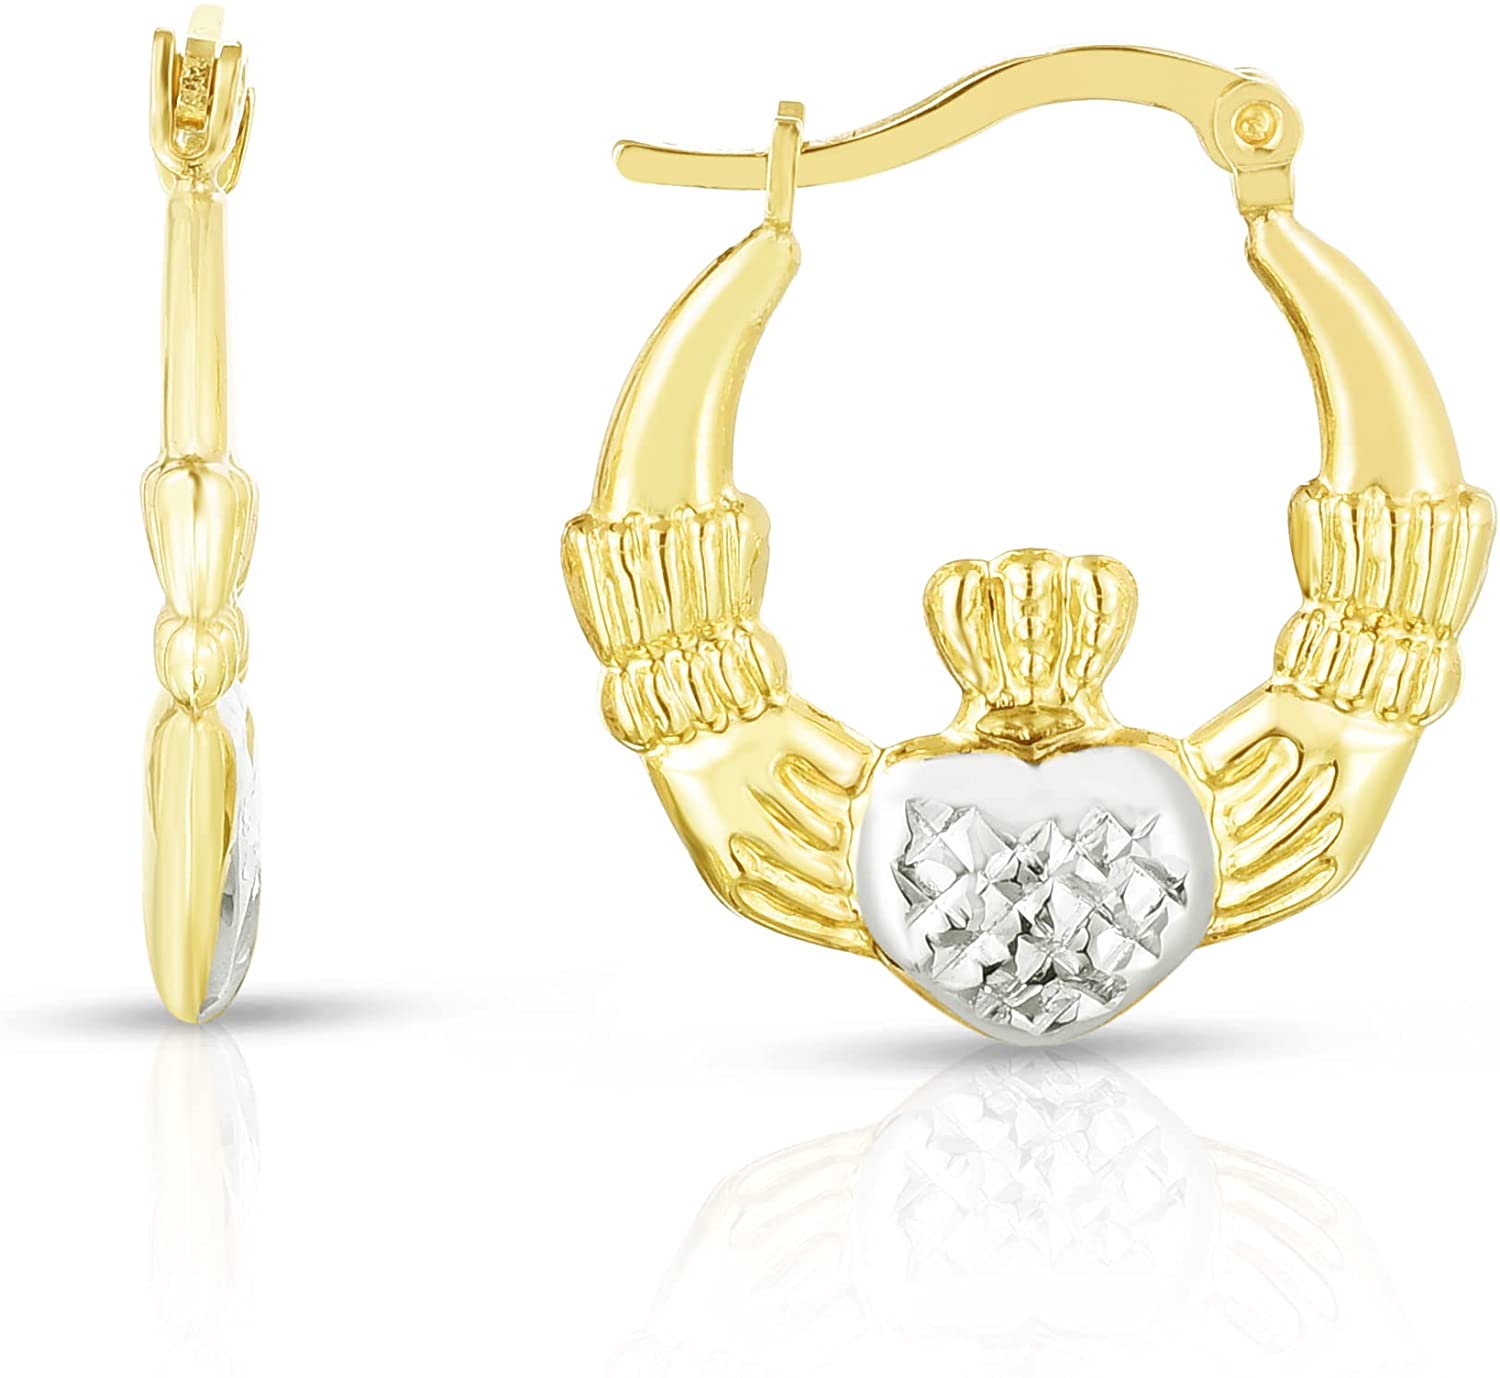 10k Yellow Gold Ribbed Claddagh and Two Tone Heart Shape Hoop Earrings